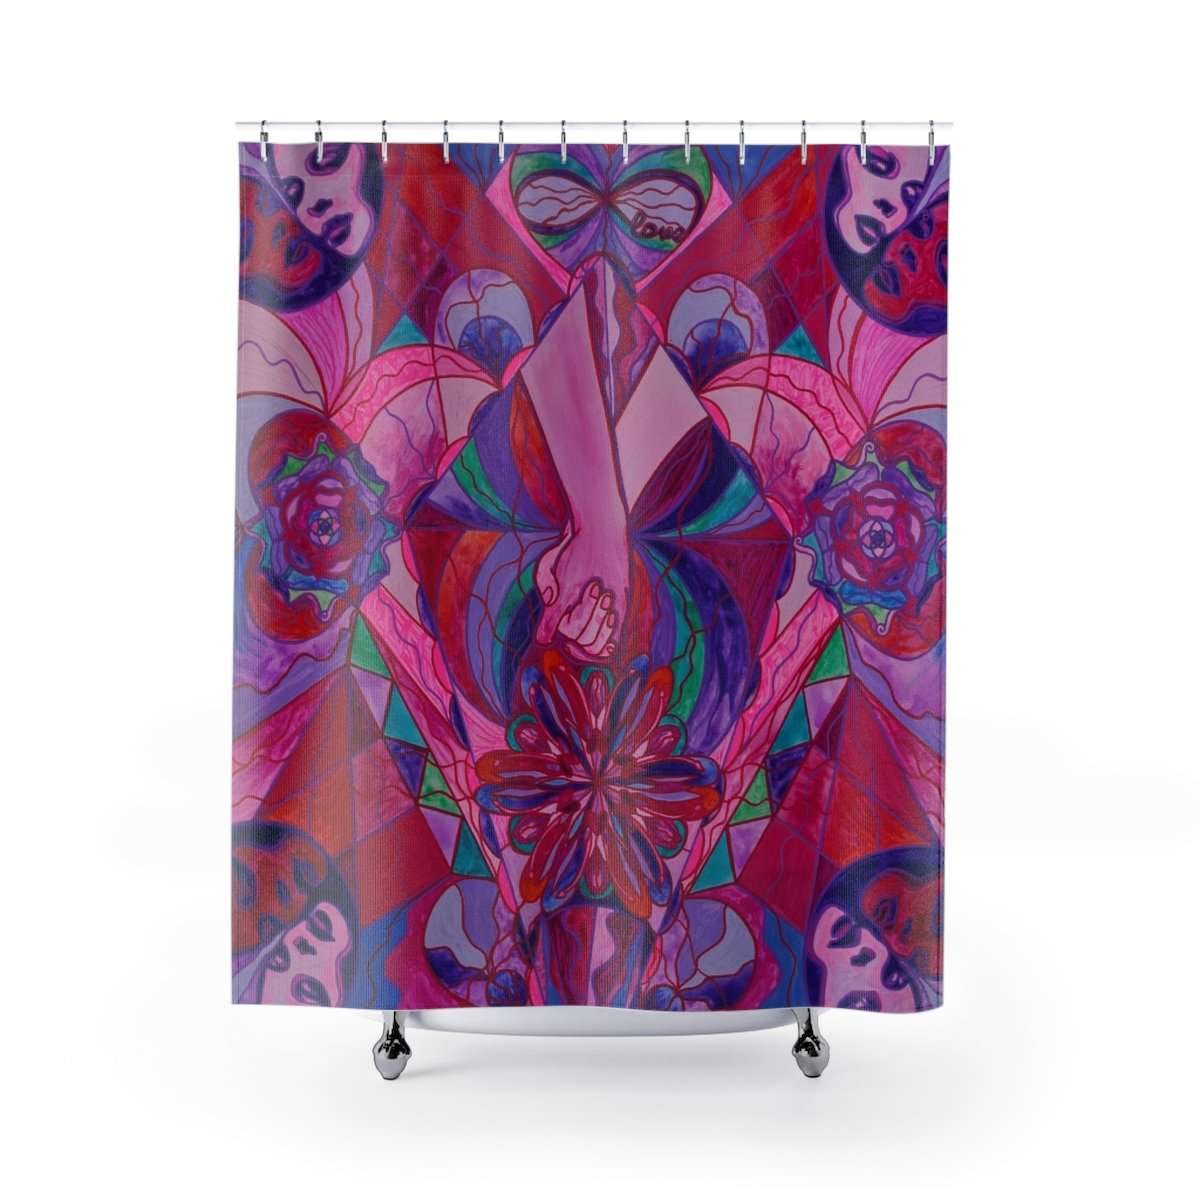 buy-cheap-wholesale-human-intimacy-shower-curtains-hot-on-sale_0.jpg